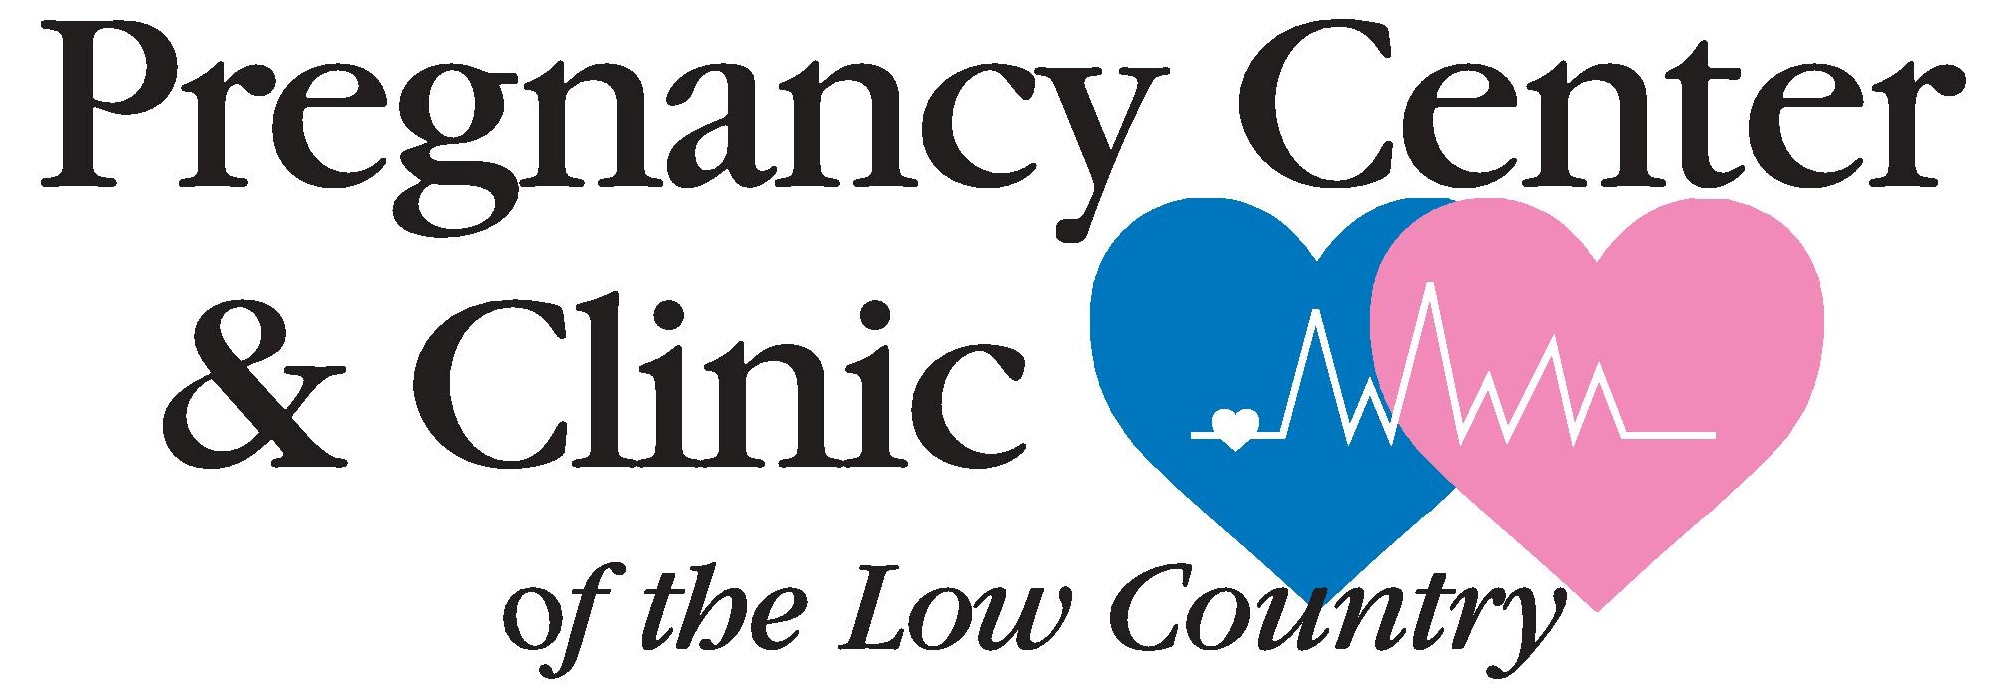 Our mission is to provide pregnancy related healthcare to women in a welcoming, safe, and confidential setting.